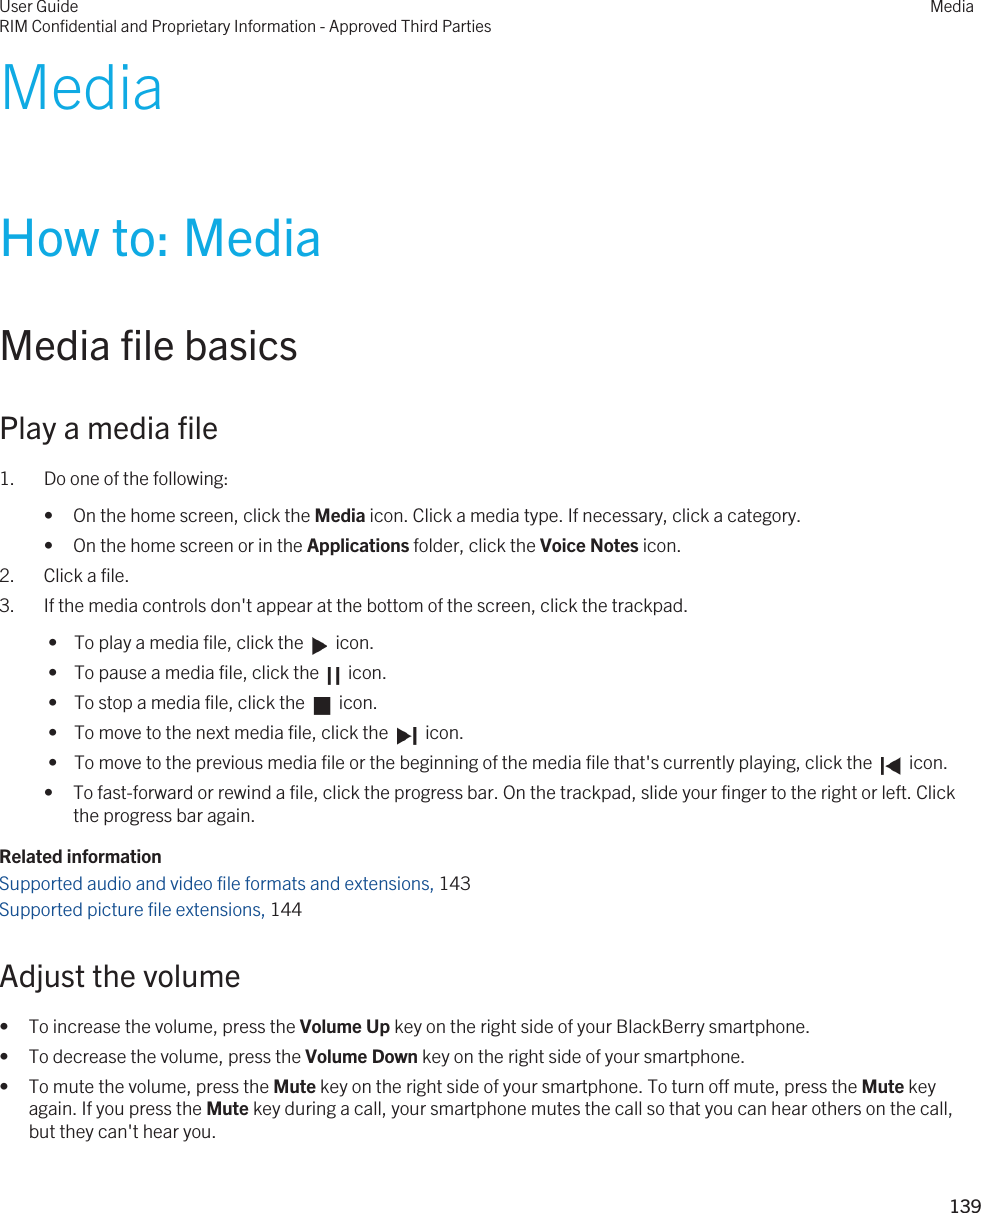 MediaHow to: MediaMedia file basicsPlay a media file1. Do one of the following:• On the home screen, click the Media icon. Click a media type. If necessary, click a category.• On the home screen or in the Applications folder, click the Voice Notes icon.2. Click a file.3. If the media controls don&apos;t appear at the bottom of the screen, click the trackpad. •  To play a media file, click the    icon. •  To pause a media file, click the    icon. •  To stop a media file, click the    icon. •  To move to the next media file, click the    icon. •  To move to the previous media file or the beginning of the media file that&apos;s currently playing, click the    icon.• To fast-forward or rewind a file, click the progress bar. On the trackpad, slide your finger to the right or left. Click the progress bar again.Related informationSupported audio and video file formats and extensions, 143Supported picture file extensions, 144Adjust the volume• To increase the volume, press the Volume Up key on the right side of your BlackBerry smartphone.• To decrease the volume, press the Volume Down key on the right side of your smartphone.• To mute the volume, press the Mute key on the right side of your smartphone. To turn off mute, press the Mute key again. If you press the Mute key during a call, your smartphone mutes the call so that you can hear others on the call, but they can&apos;t hear you.User GuideRIM Confidential and Proprietary Information - Approved Third PartiesMedia139 